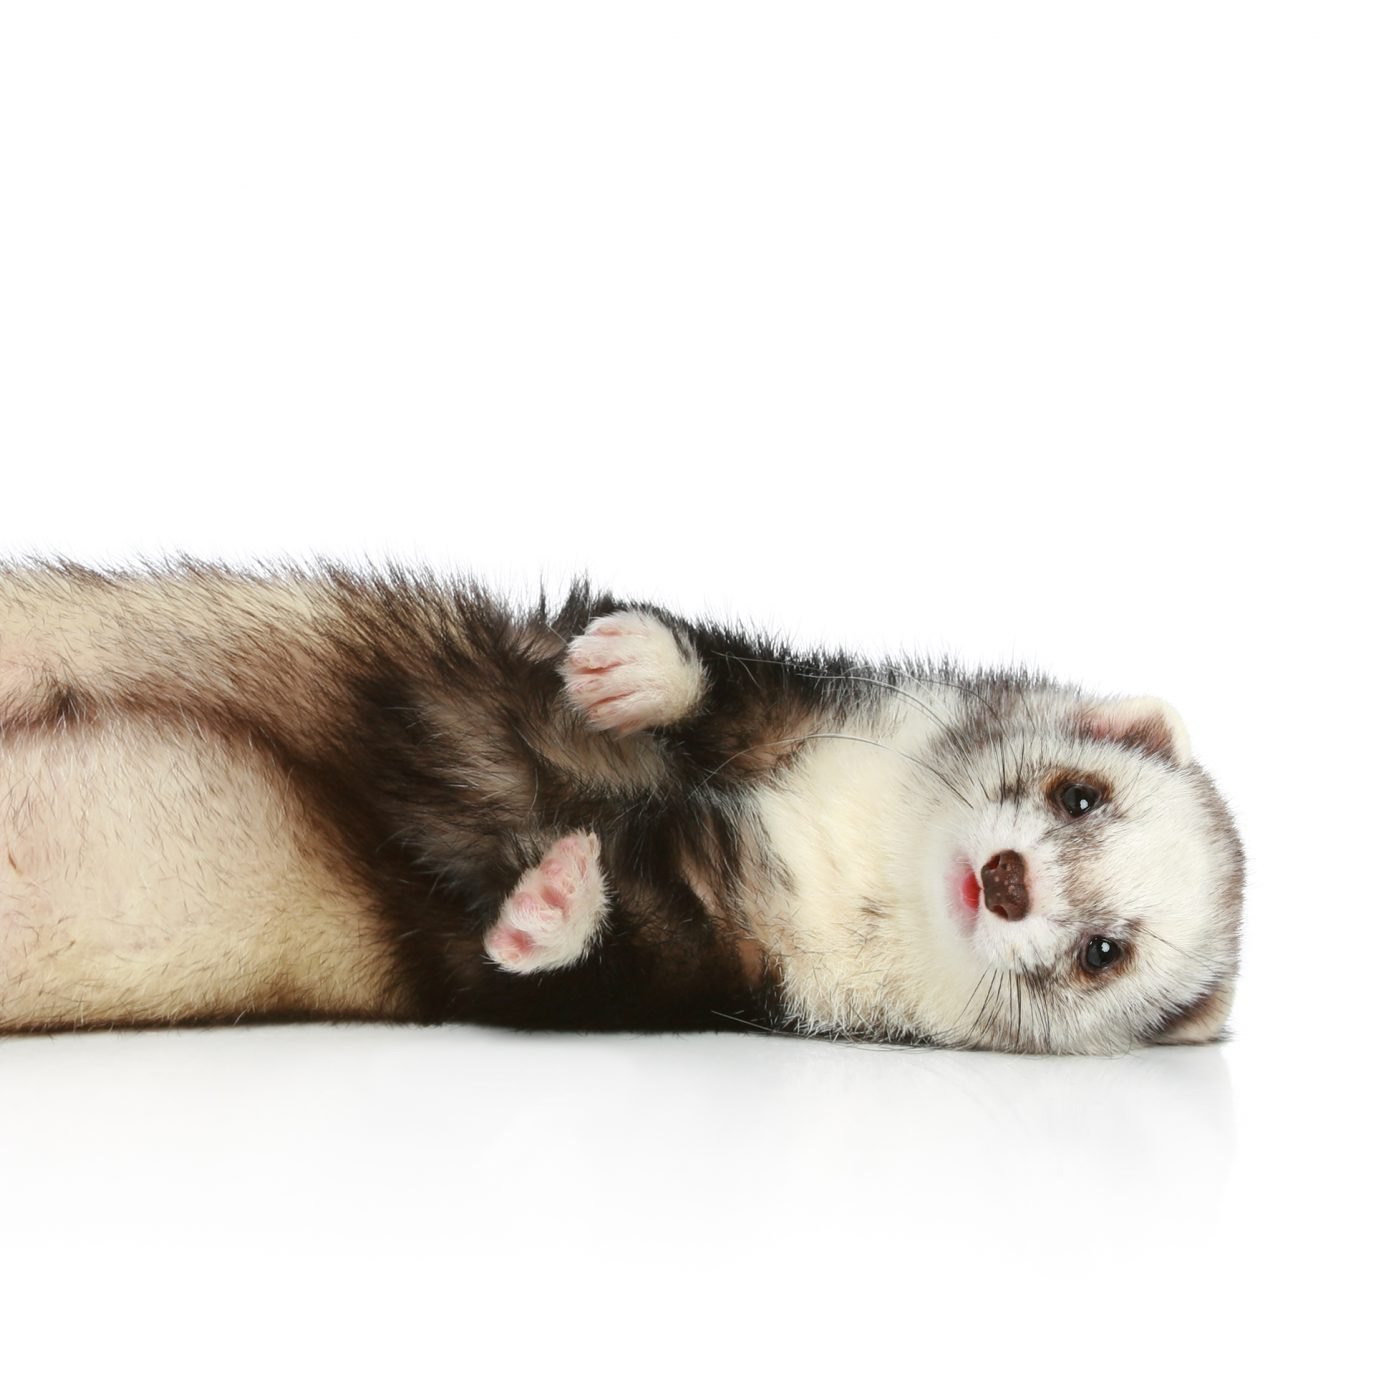 Ferret lying on site a white background